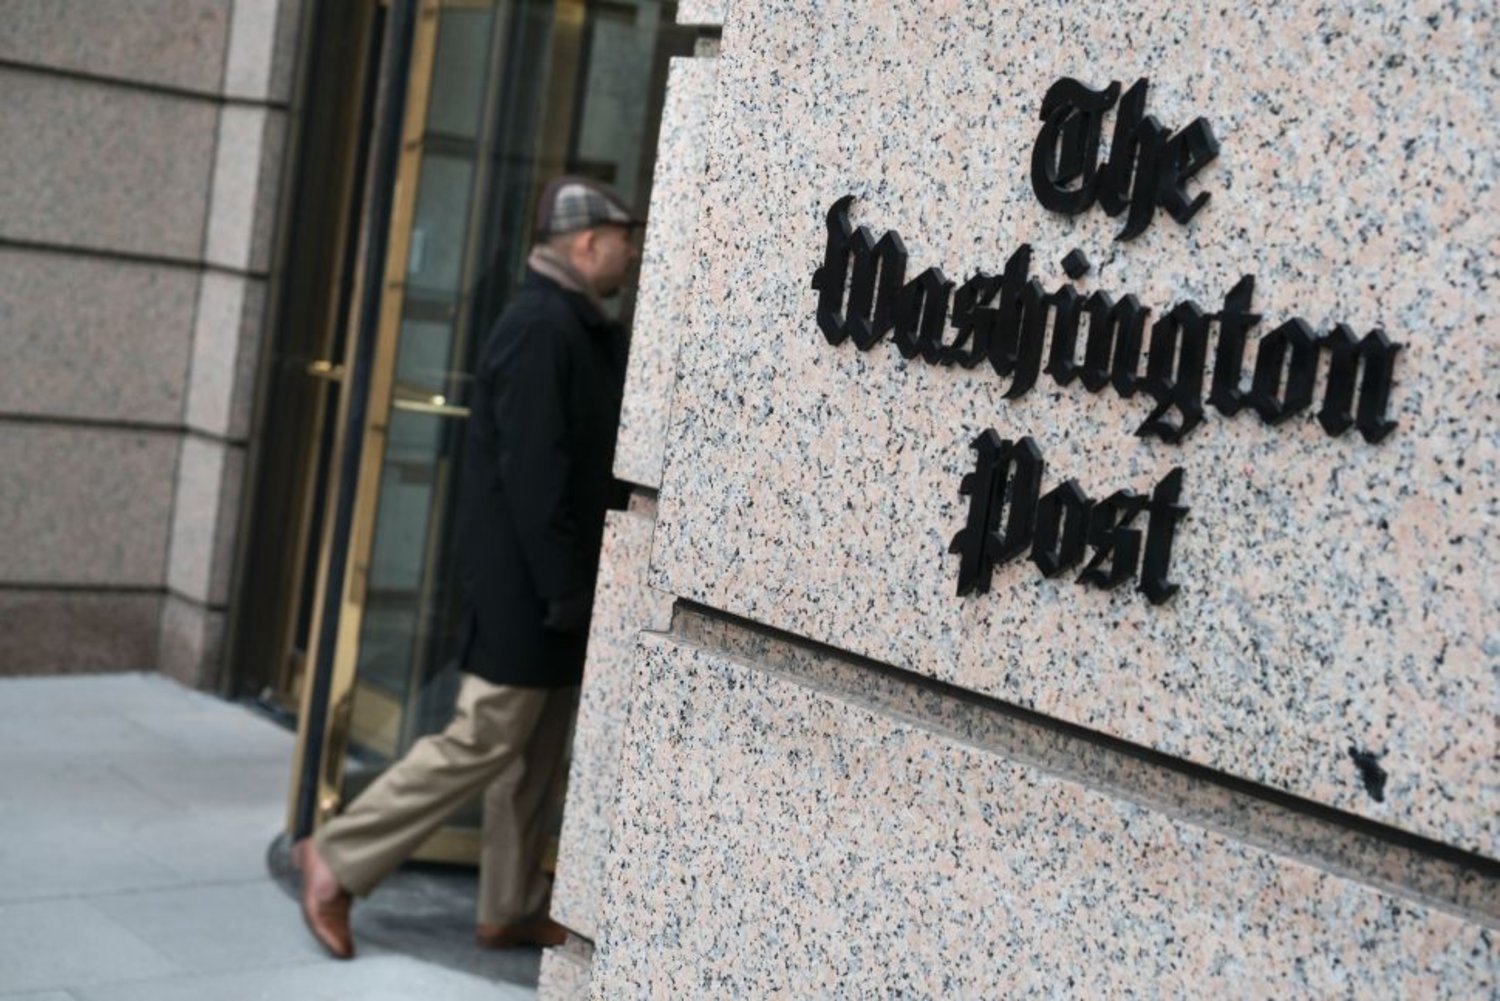 The Washington Post building. (Getty Images)